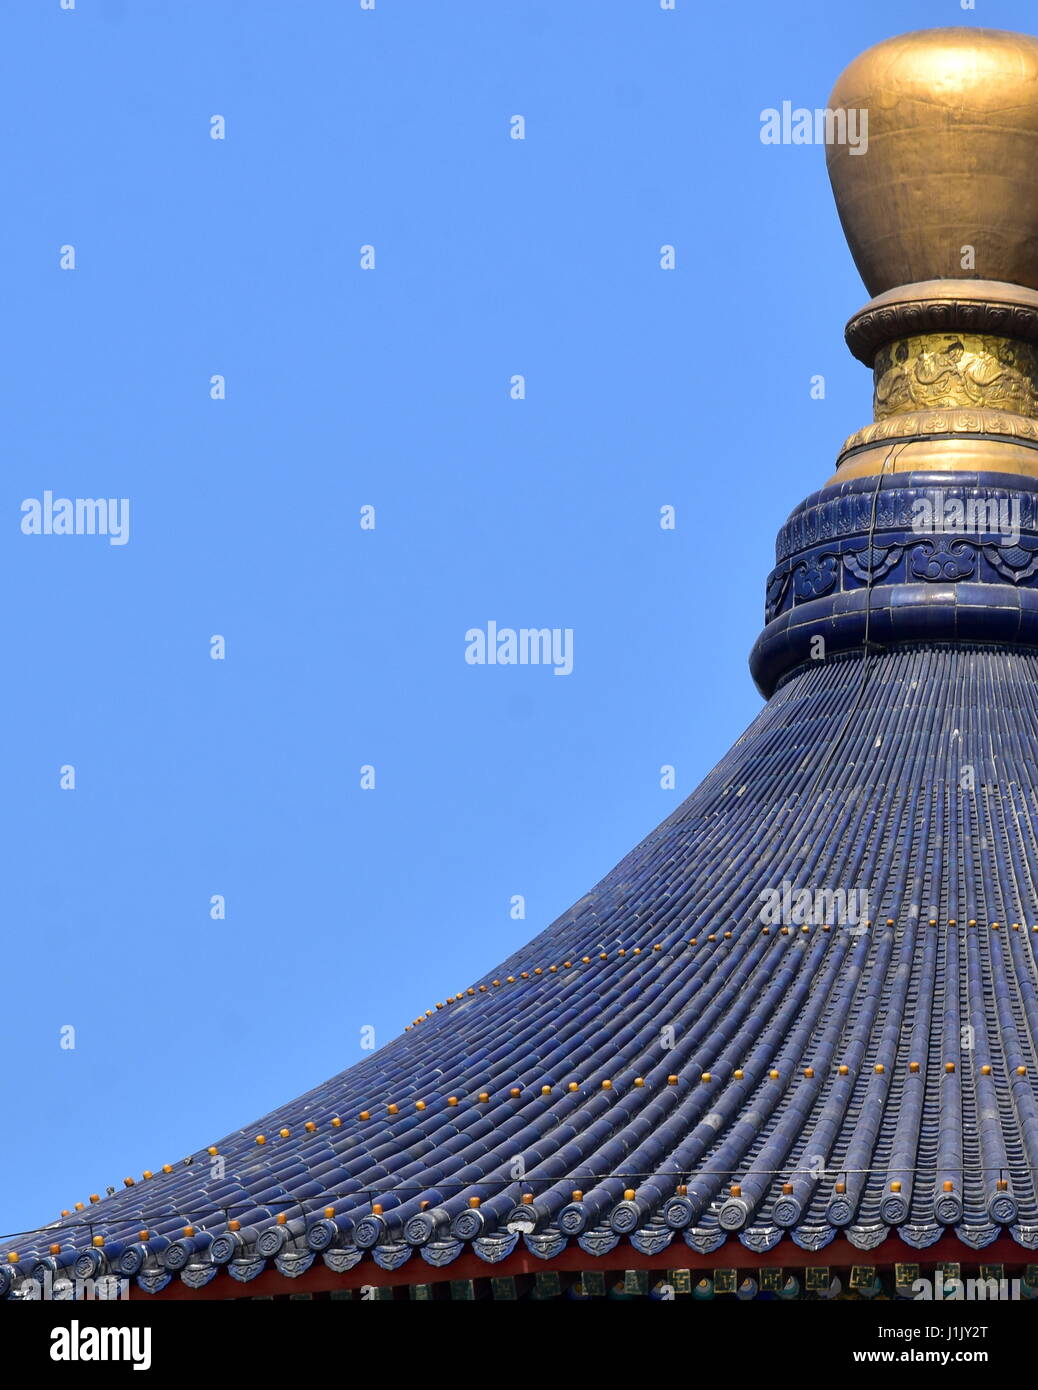 Temple of Heaven top roof detail against clear blue sky - Beijing, China Stock Photo